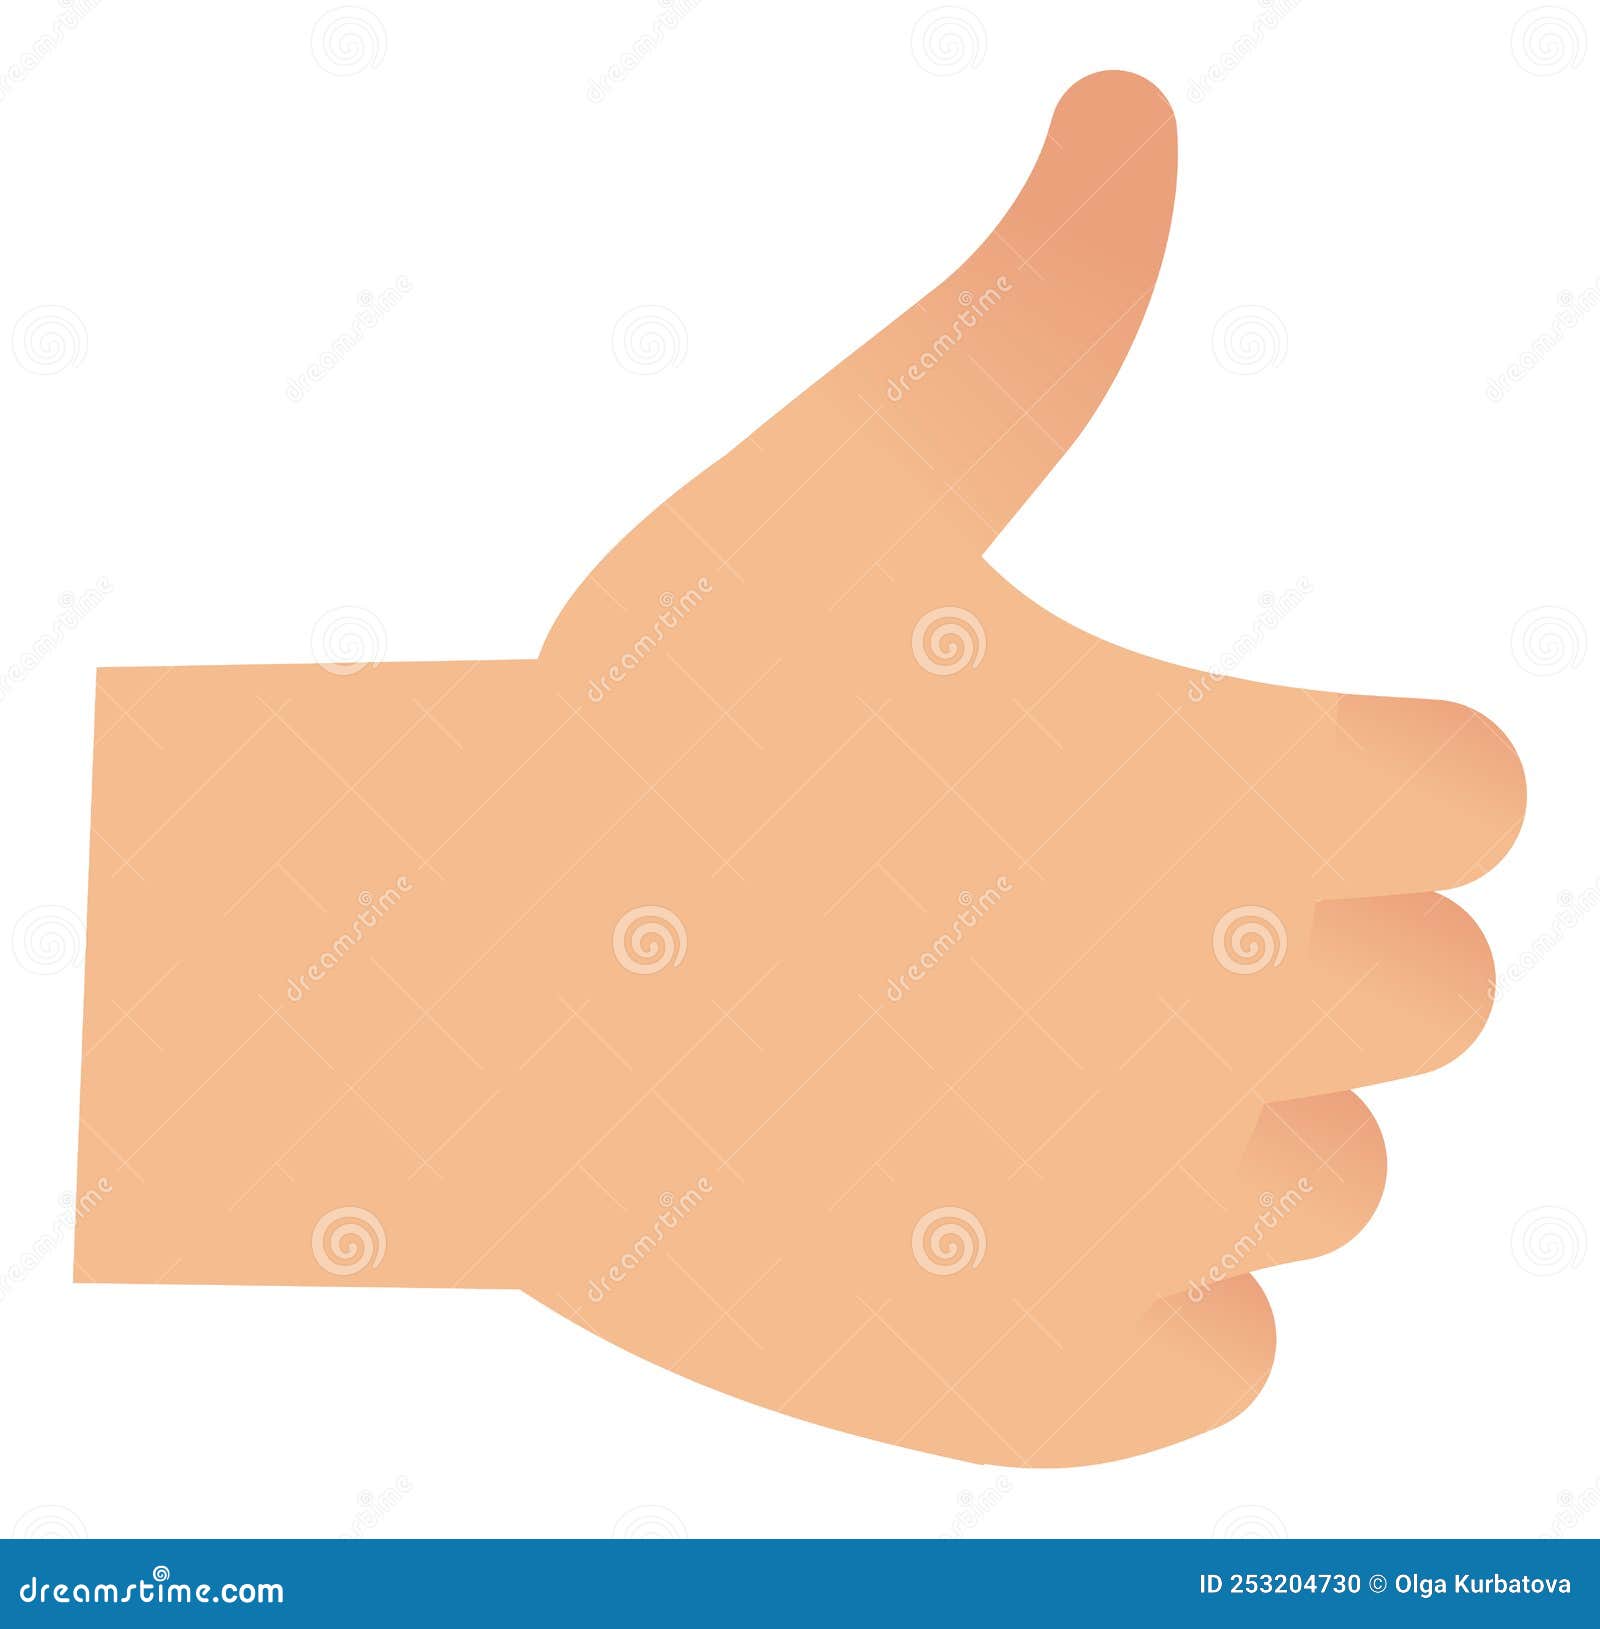 approve icon. like hand gesture. thumb up